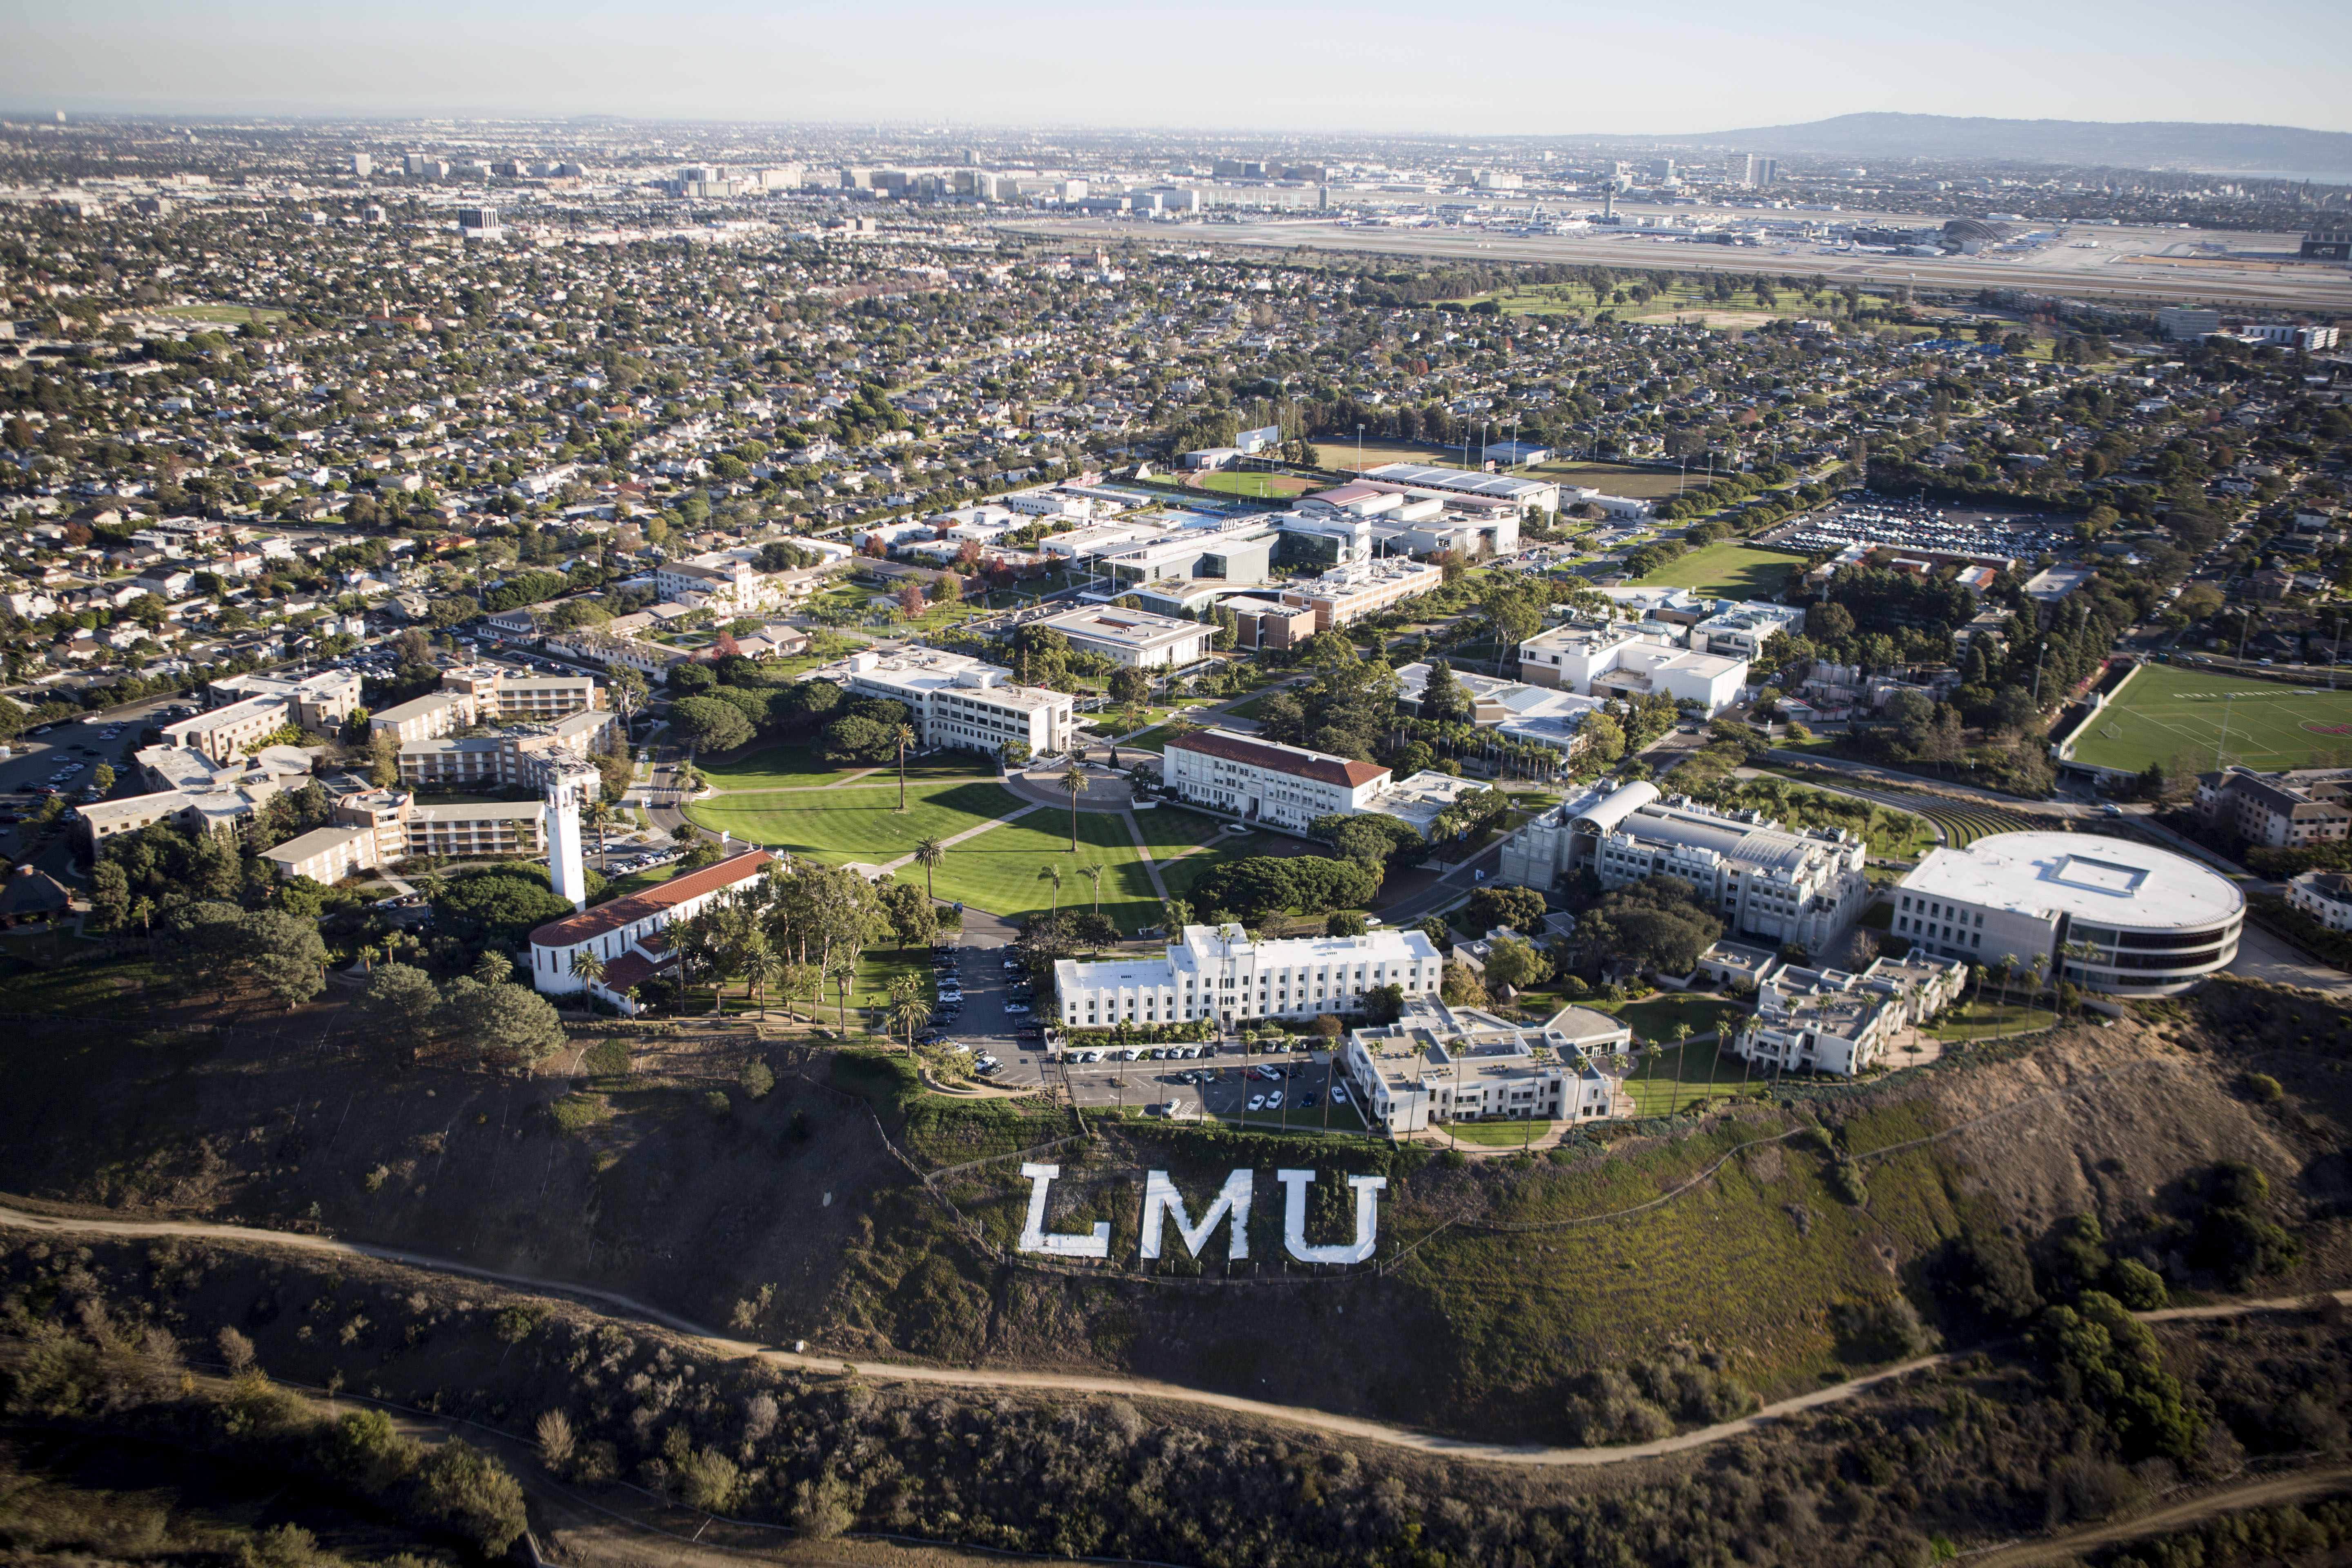 Visit Green LMU at the Study Abroad Fair on September 12 - LMU This Week